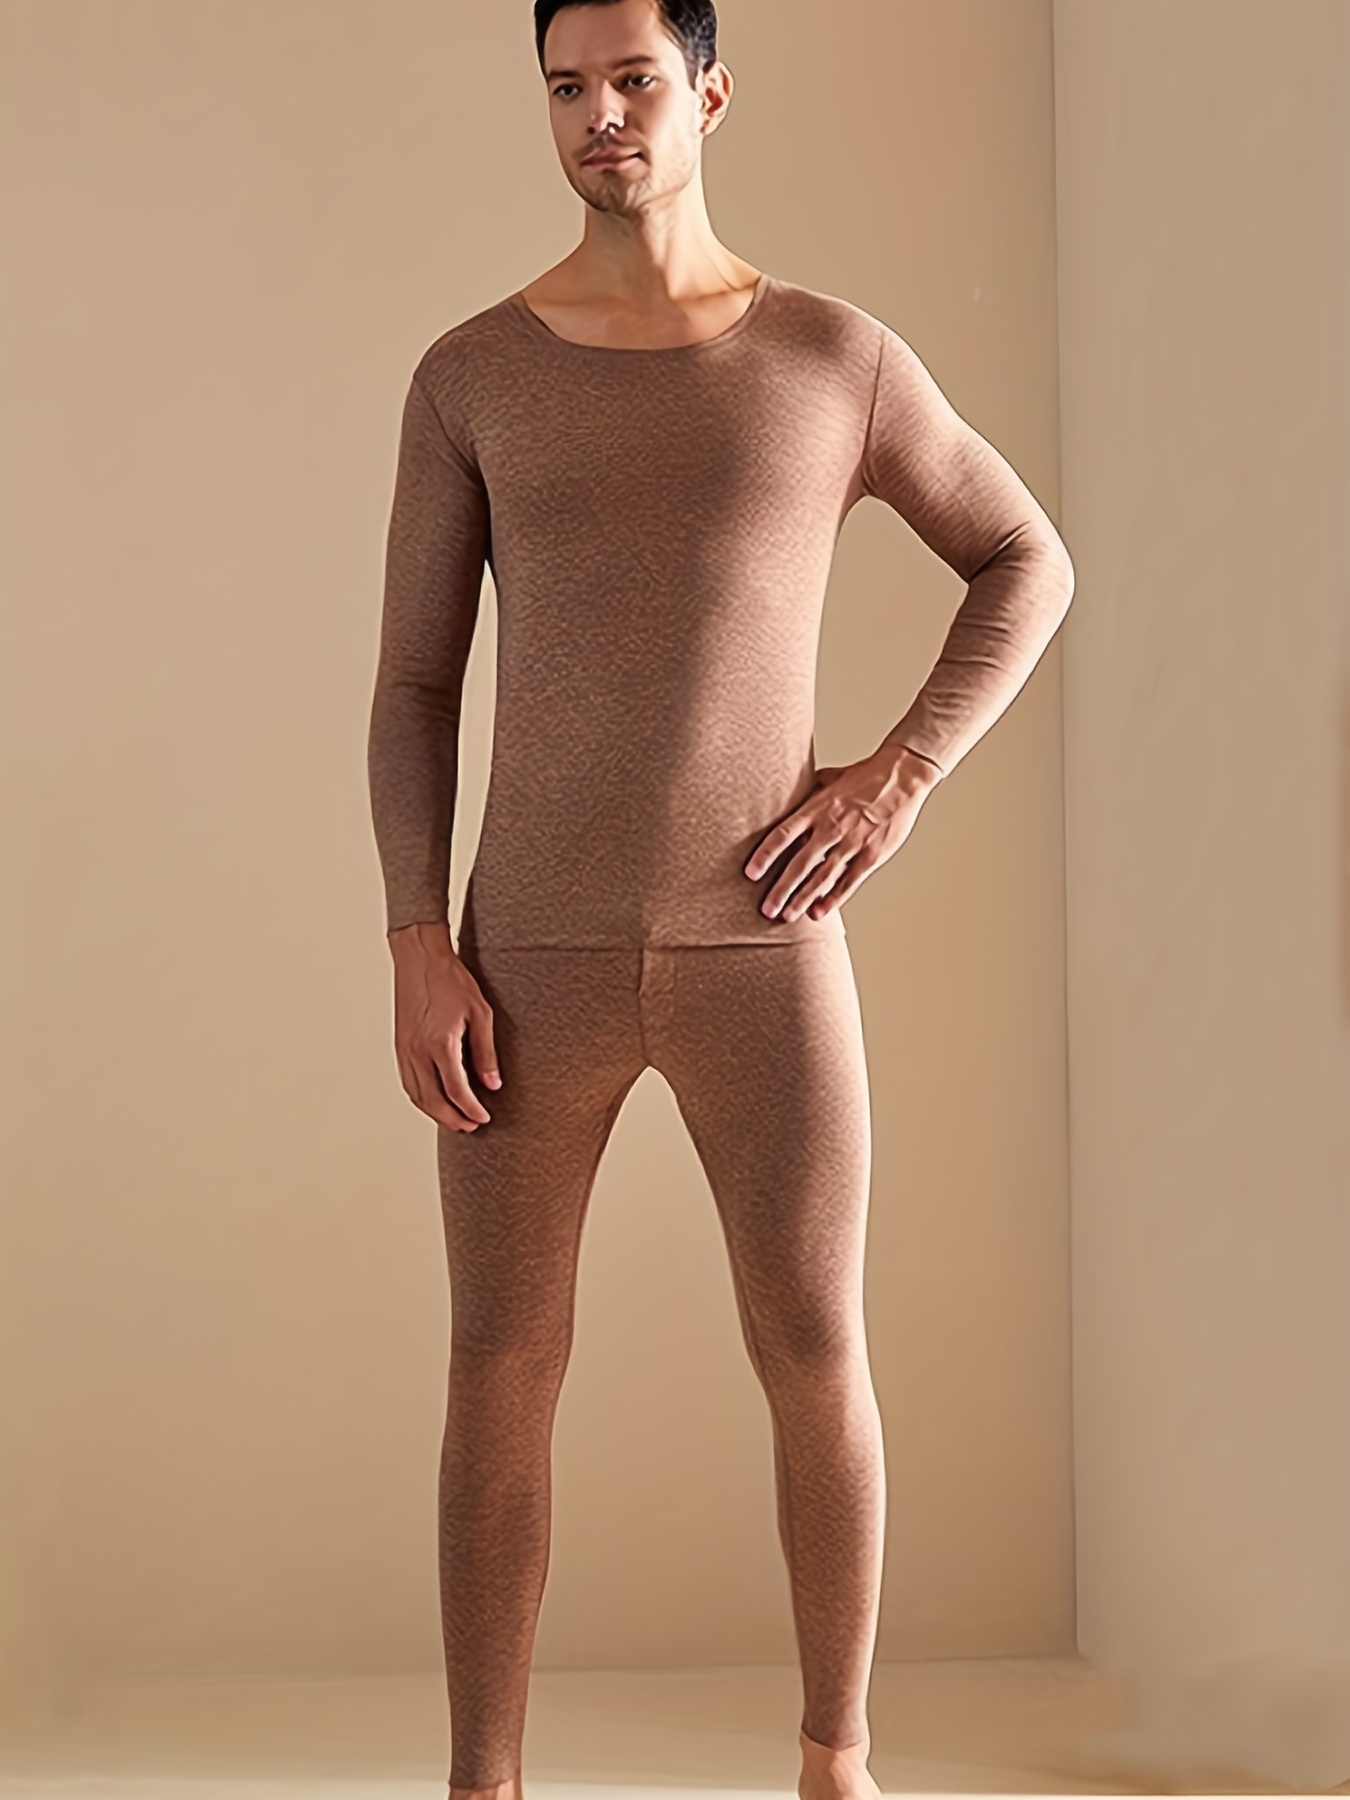 Thermal Underwear for Men Top And Bottom Thermal Trousers For